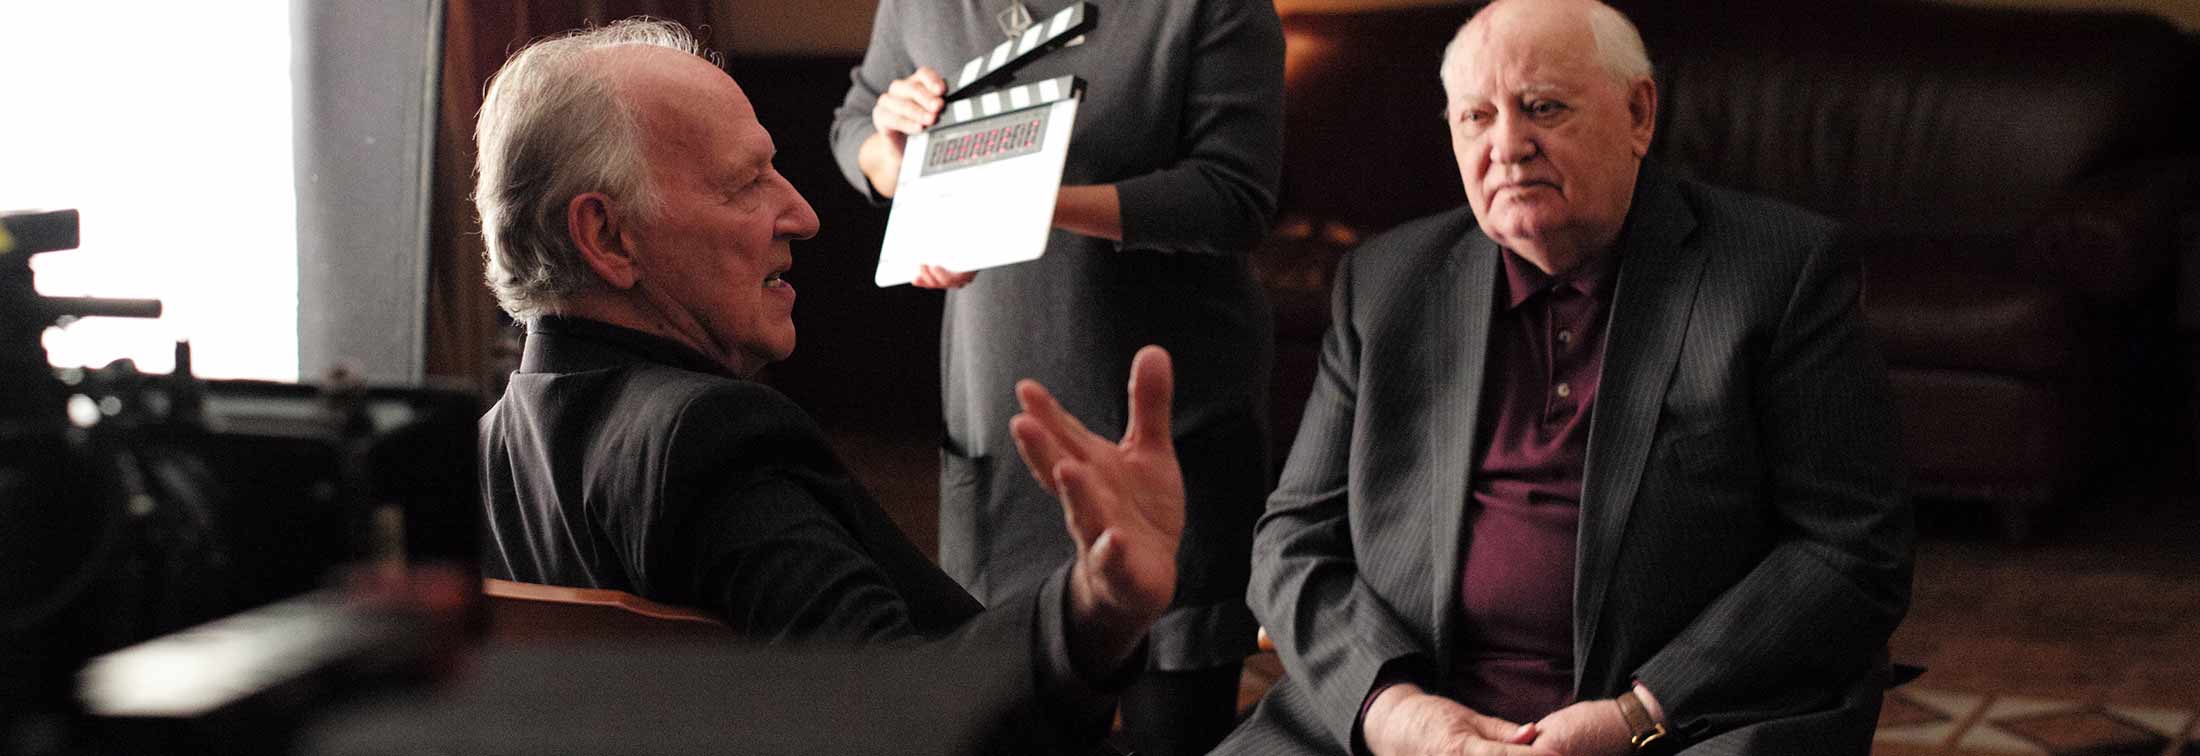 Meeting Gorbachev - Chatting with a man who changed the world